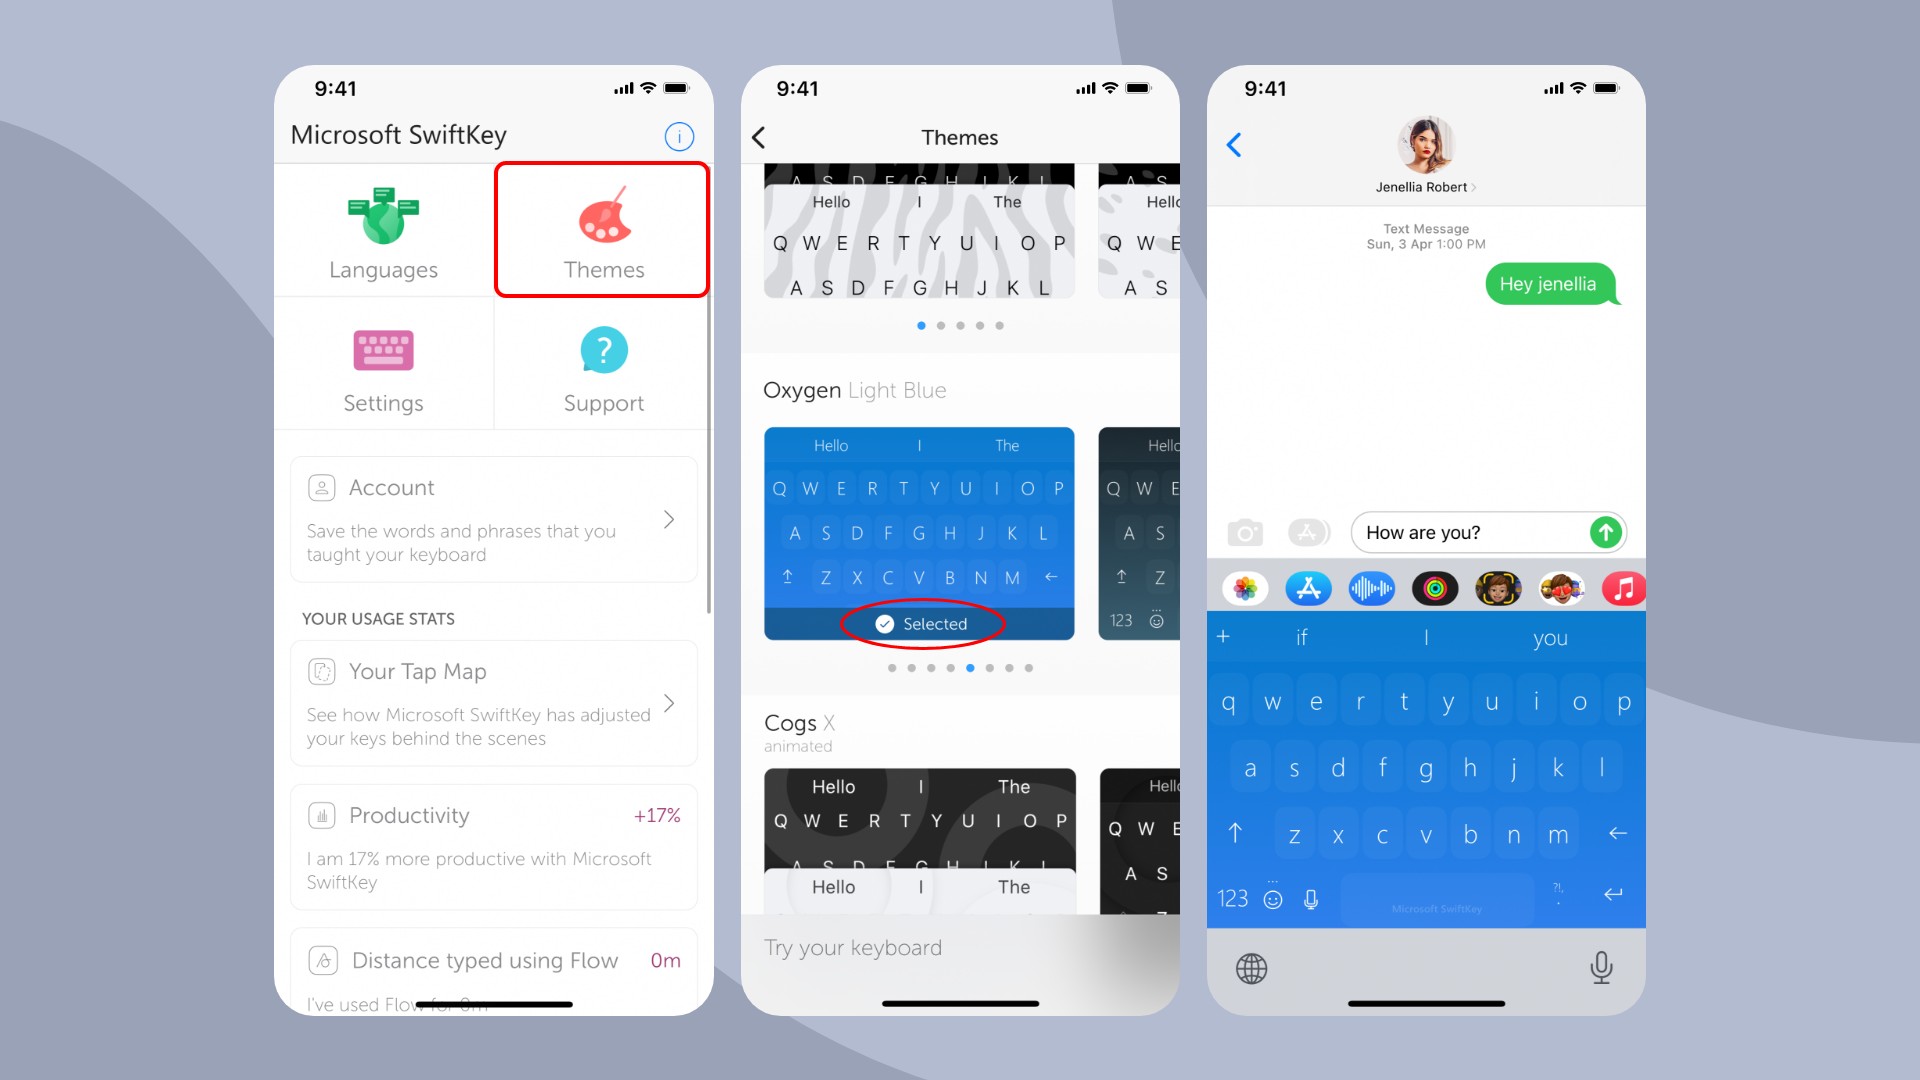 Steps on how to install SwiftKey on your iPhone or iPad and start customizing it